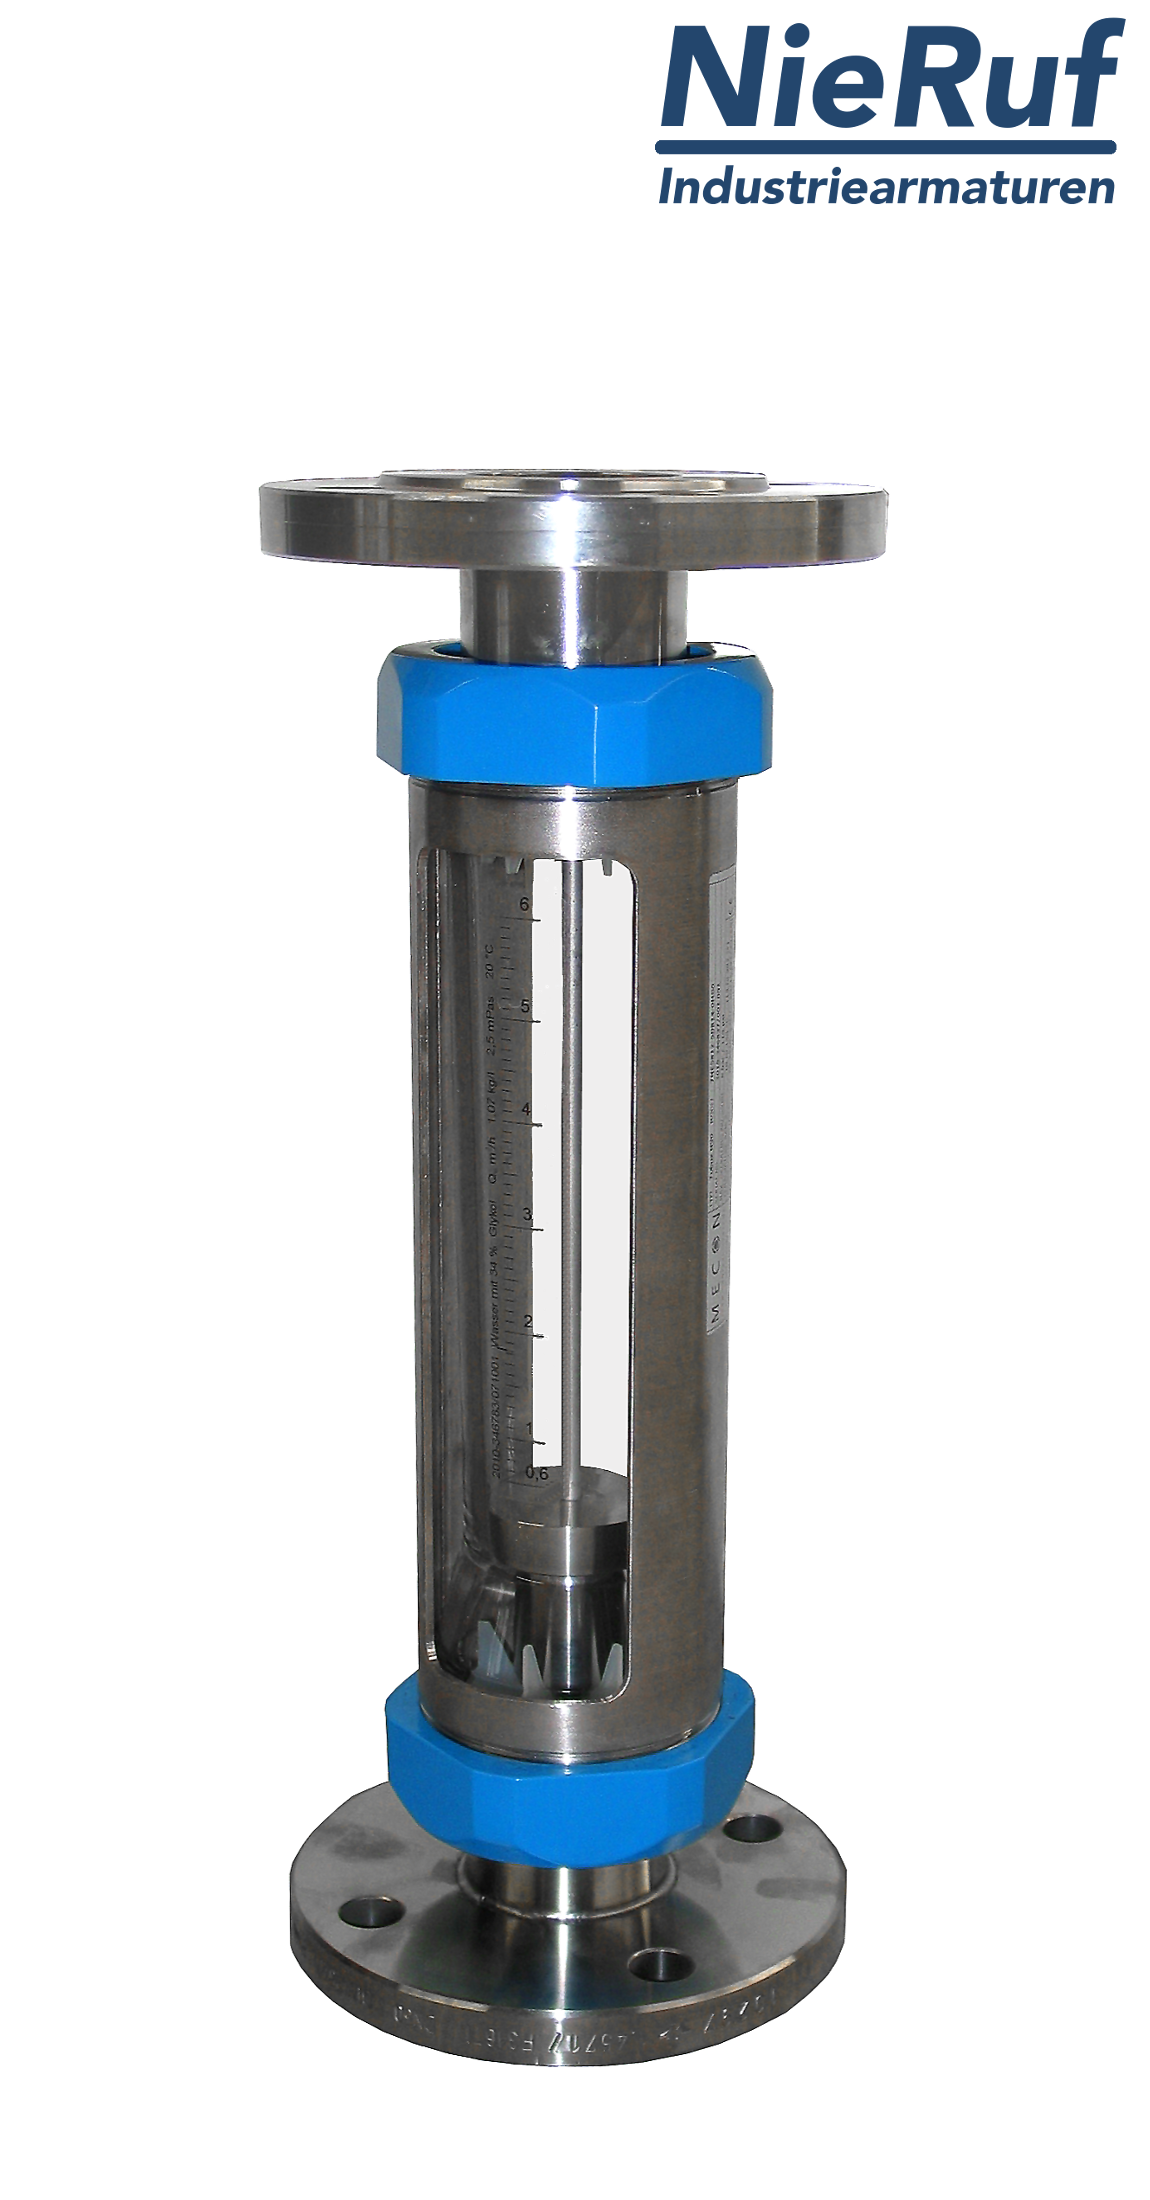 Variable area flowmeter stainless steel + borosilicate flange DN25 0.3 - 3.0 l/h water FKM